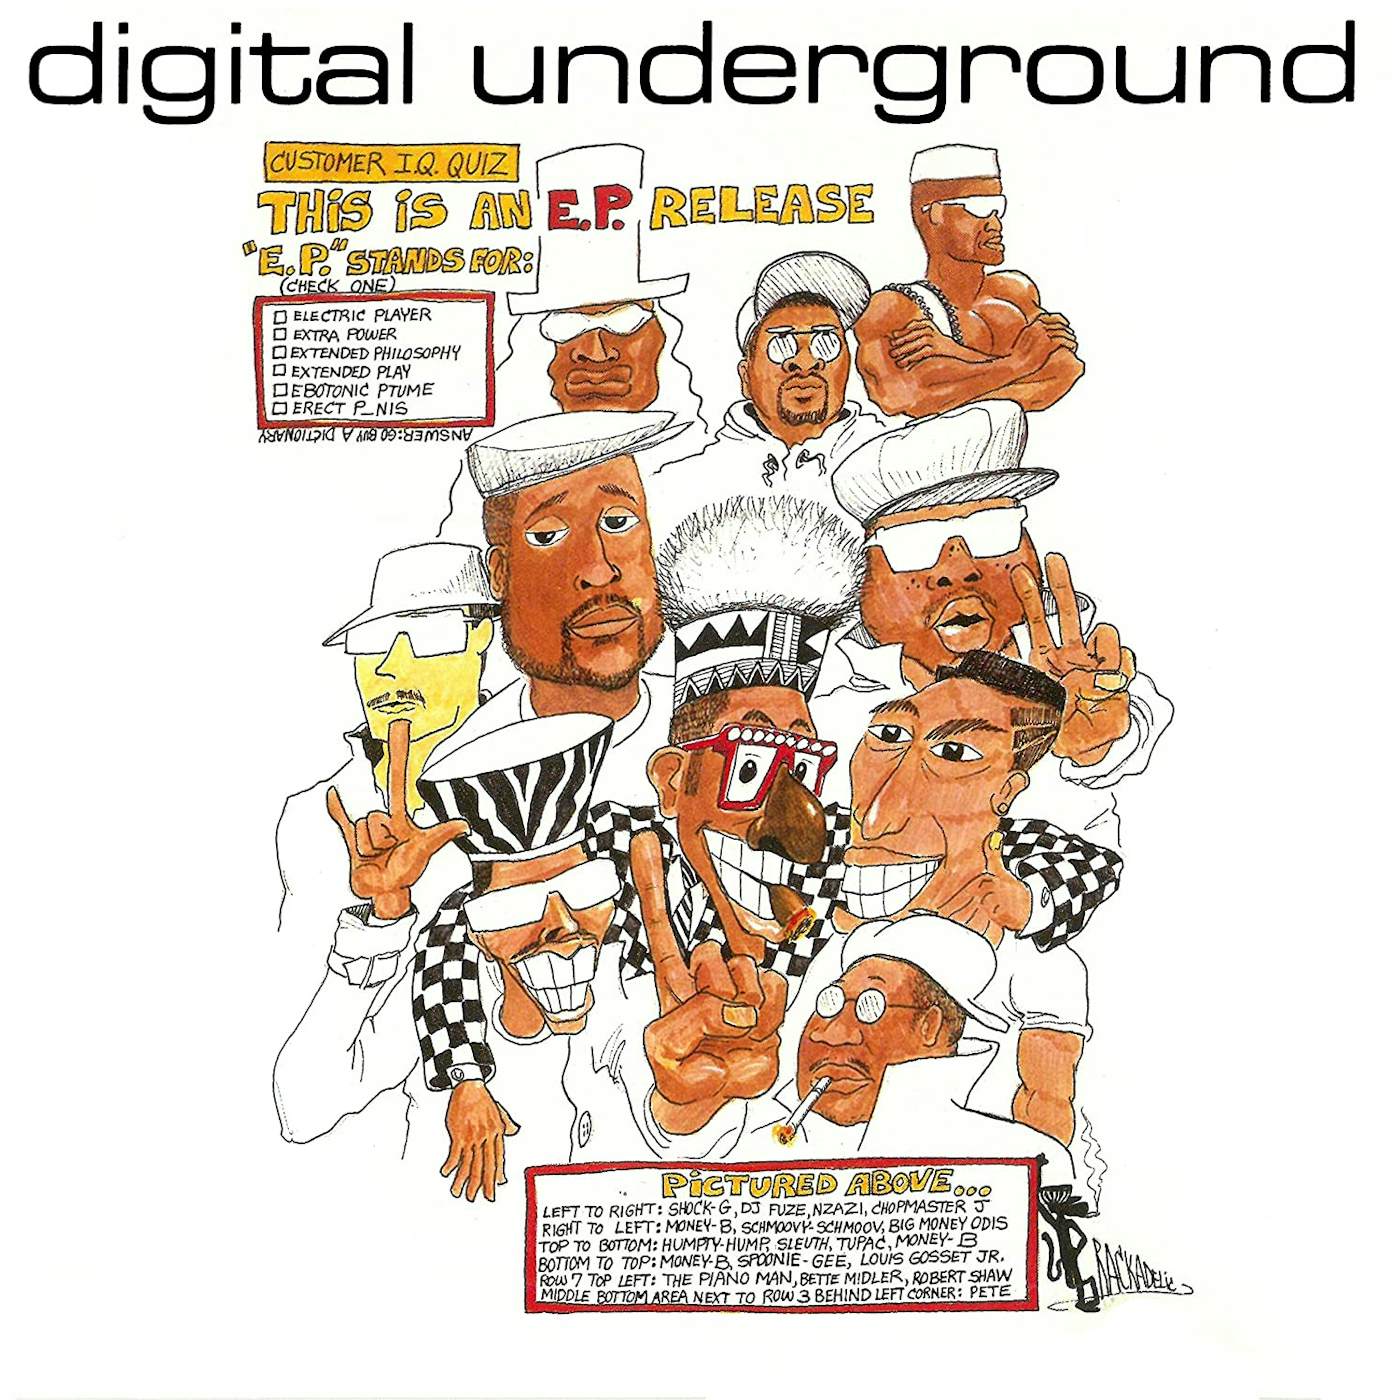 Digital Underground This Is An E.P. Release Vinyl Record